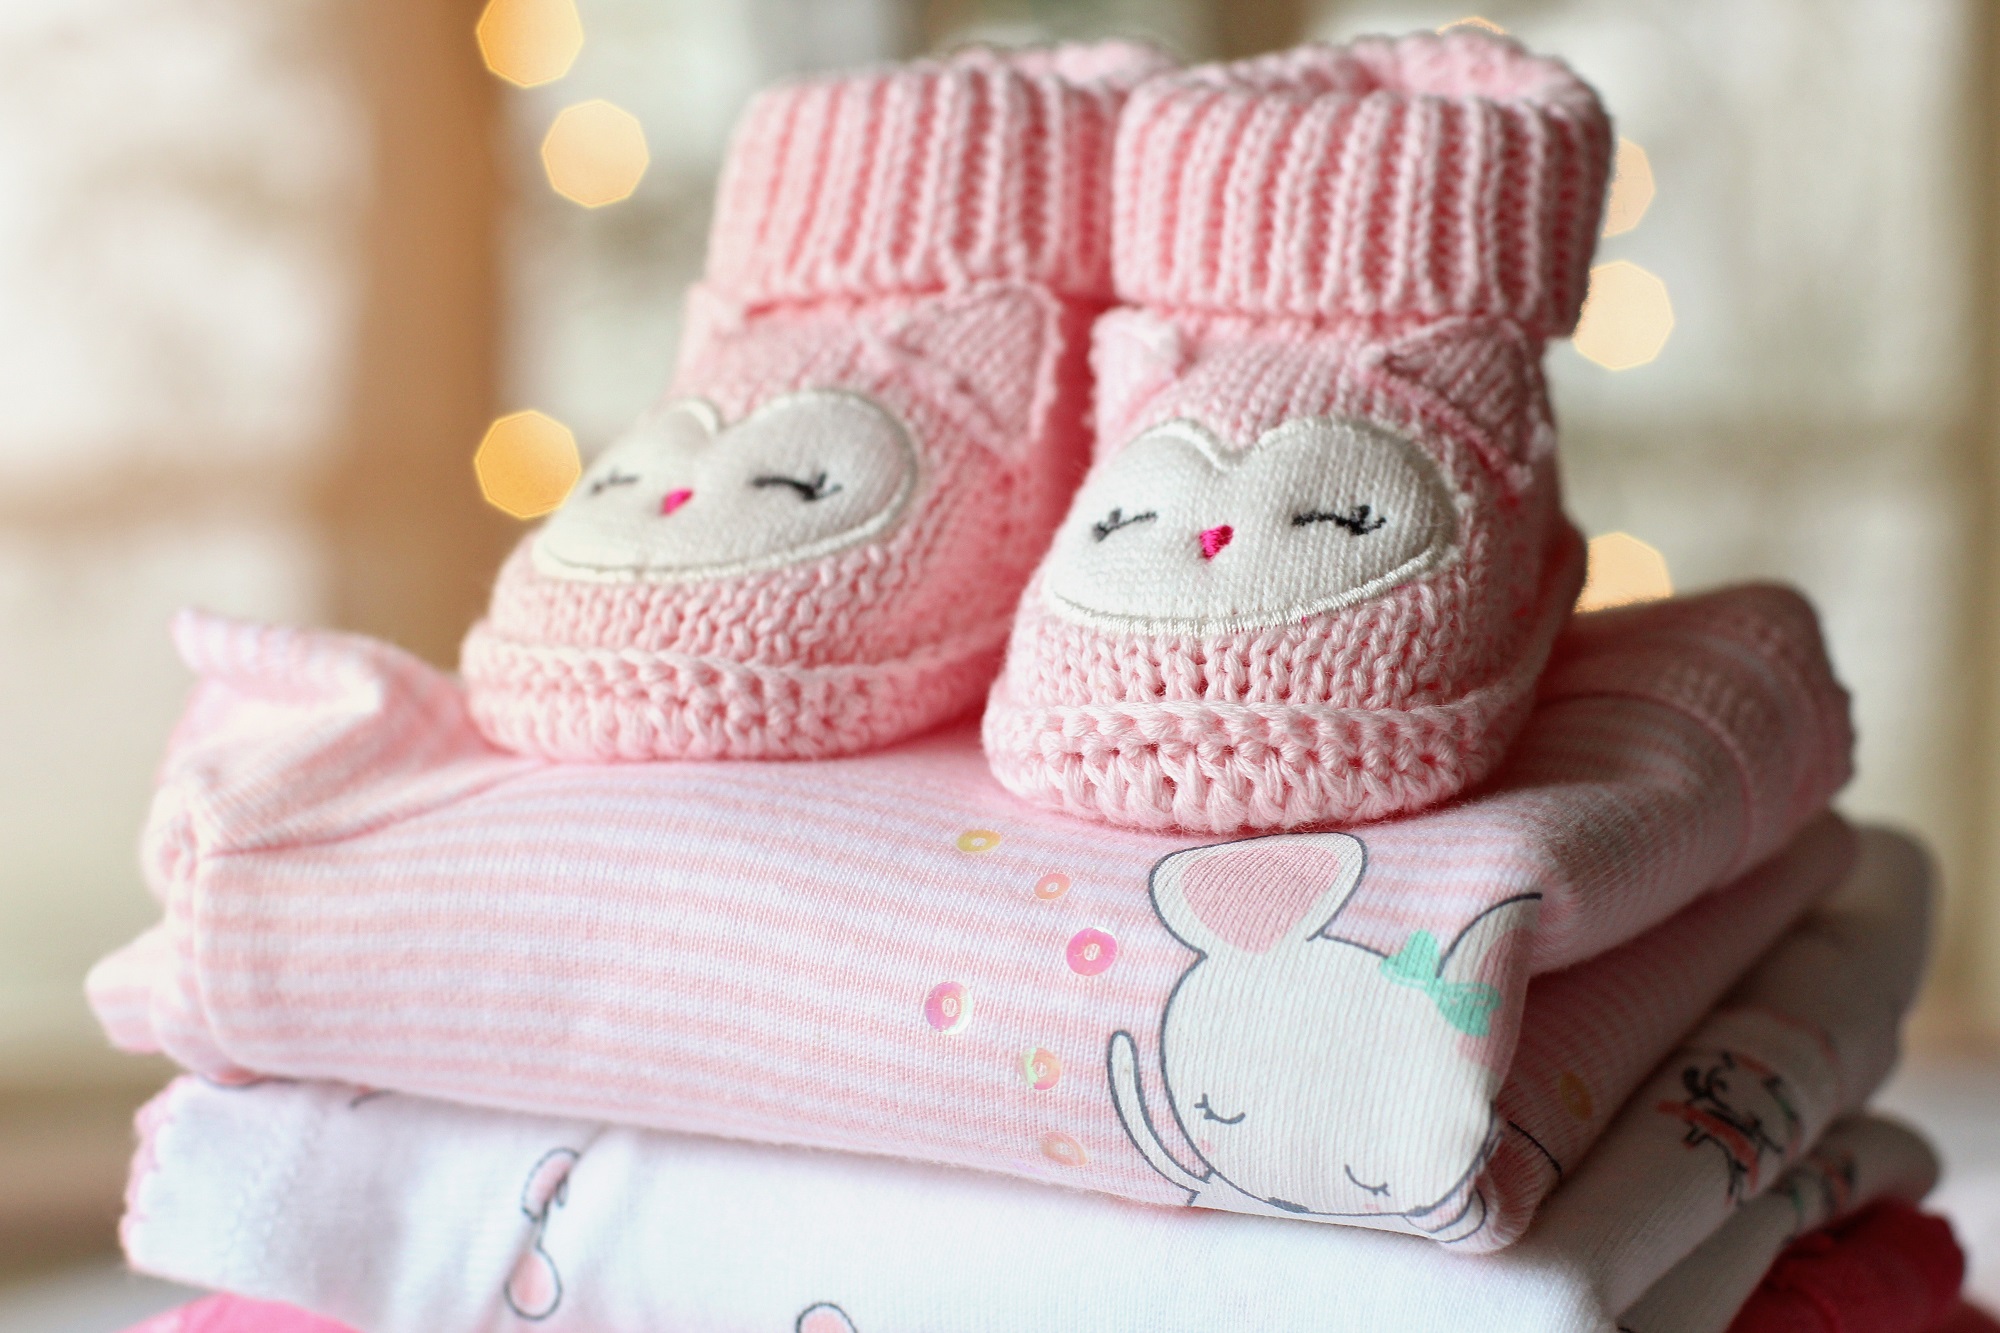 Prepare an Infant Layette - Pathway Health Clinic